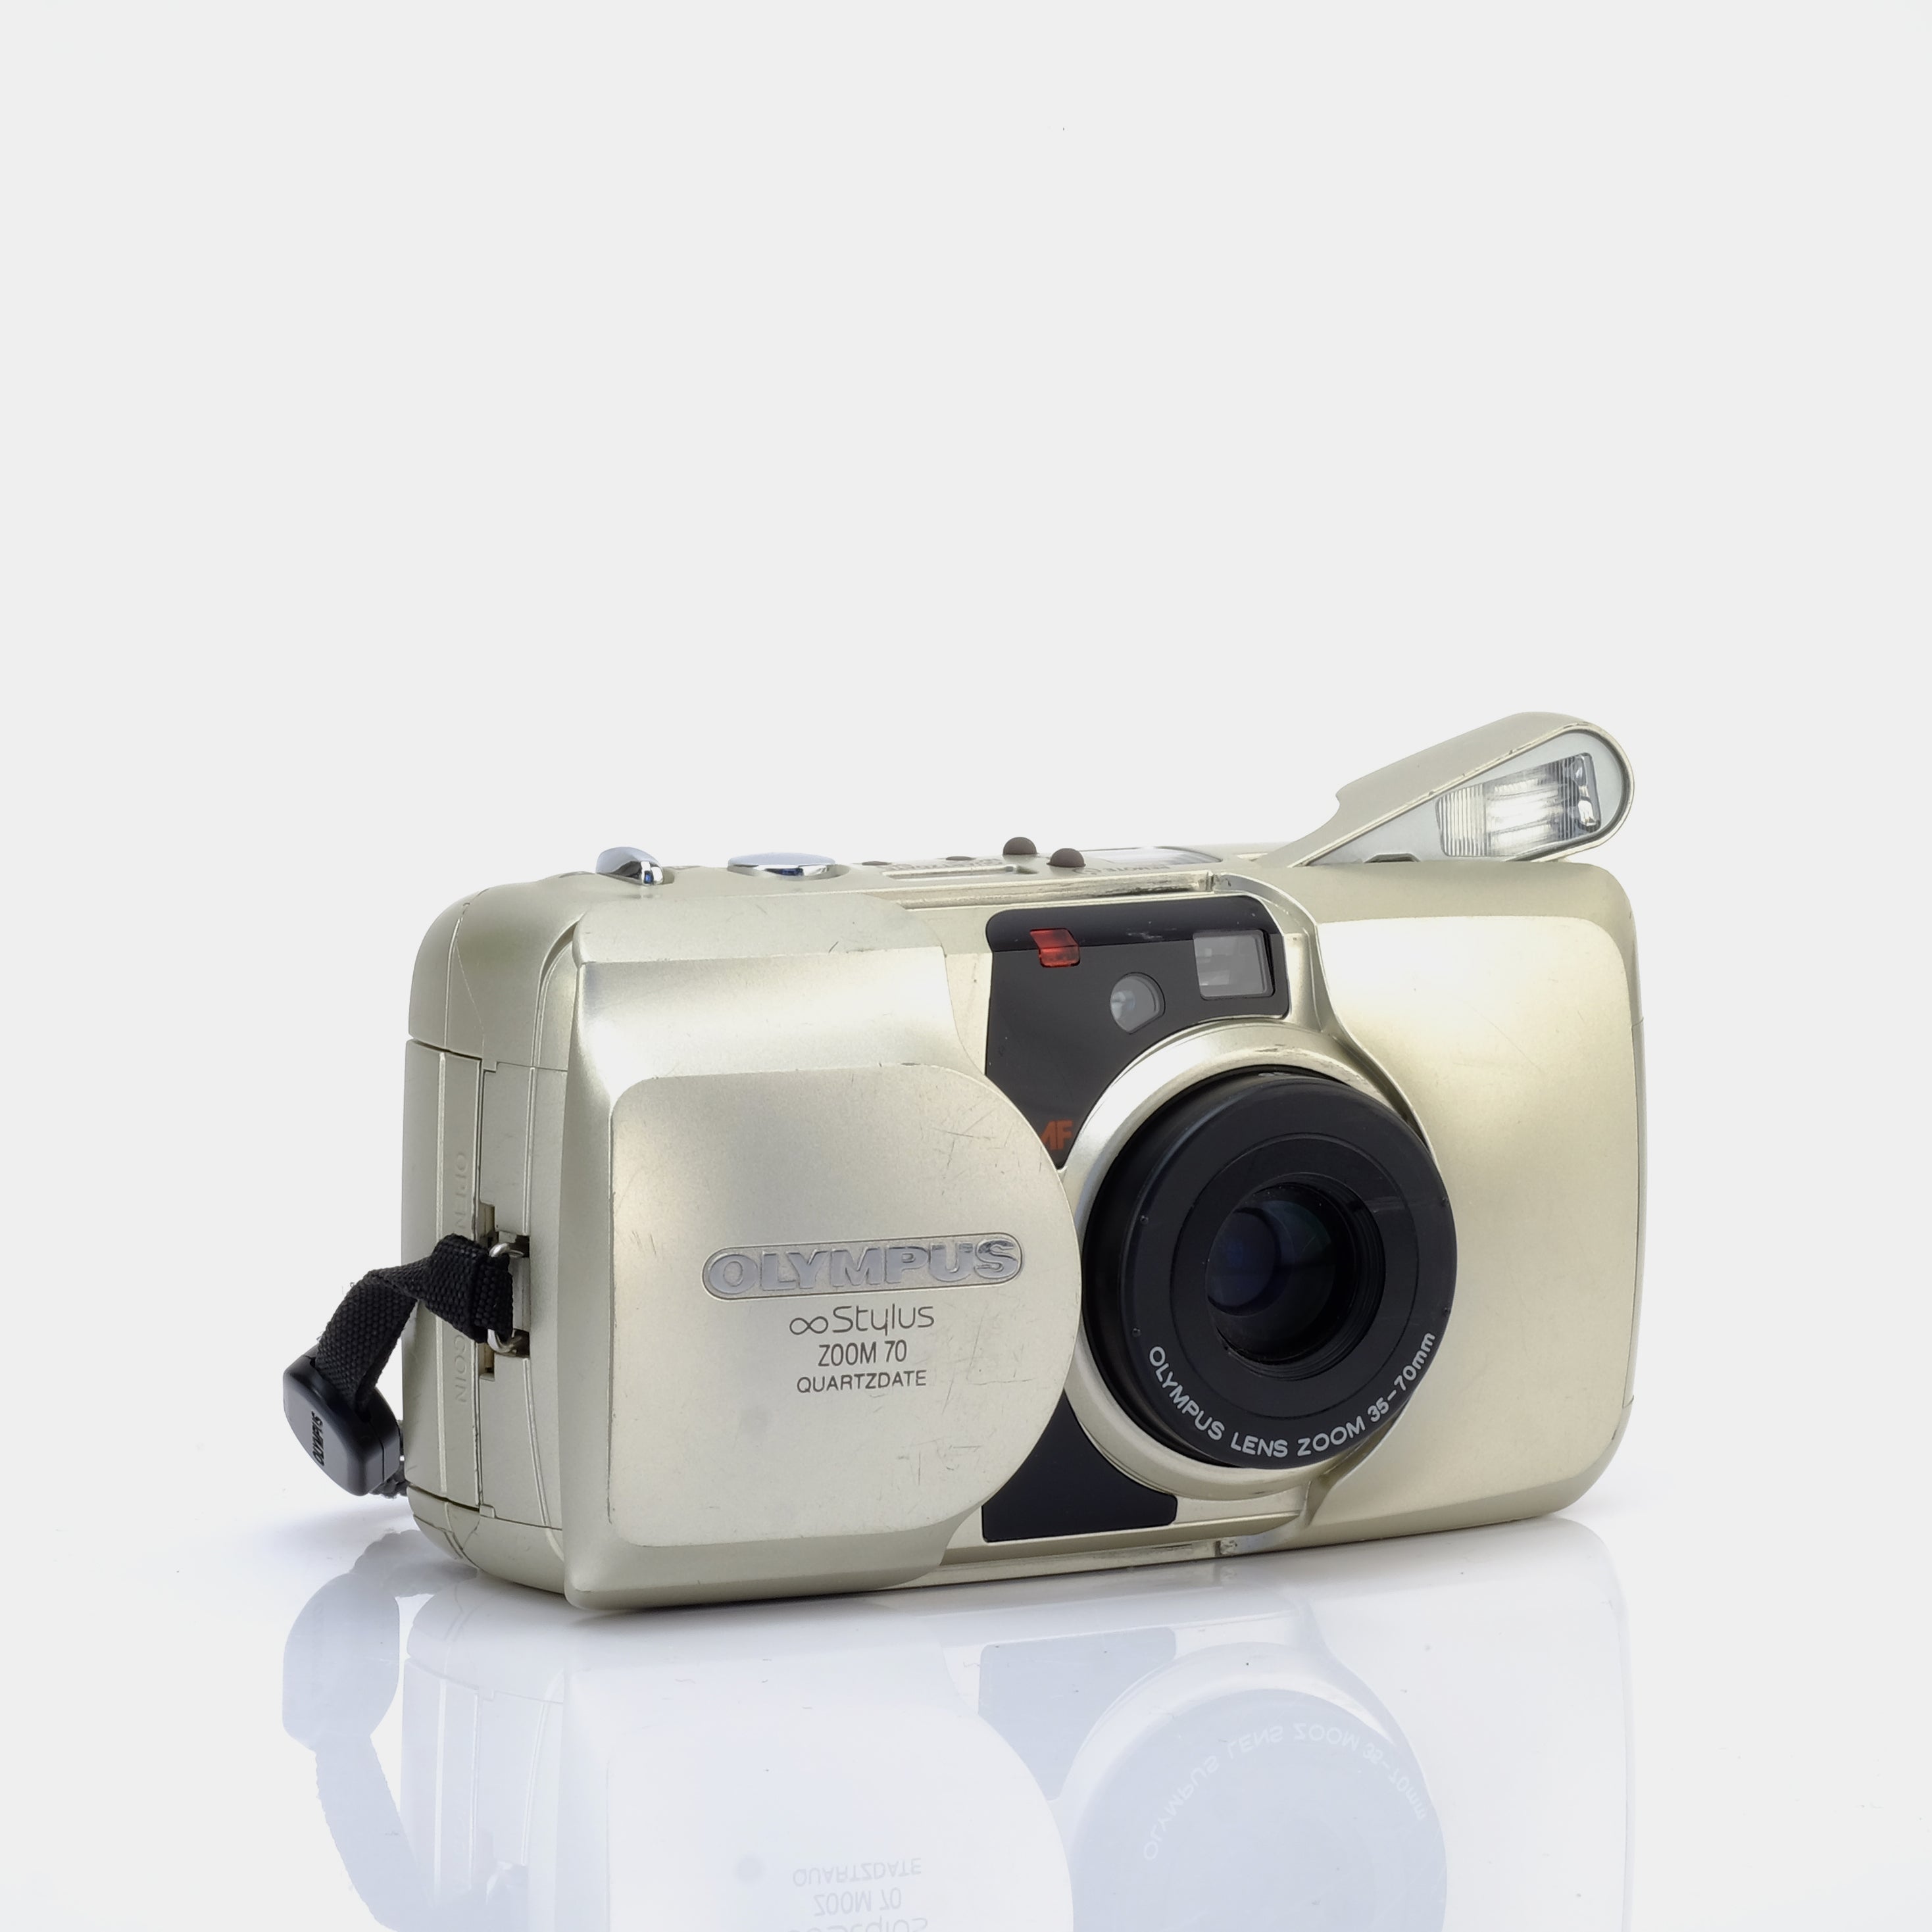 Olympus ∞ Infinity Stylus Zoom 70 35mm Point and Shoot Film Camera